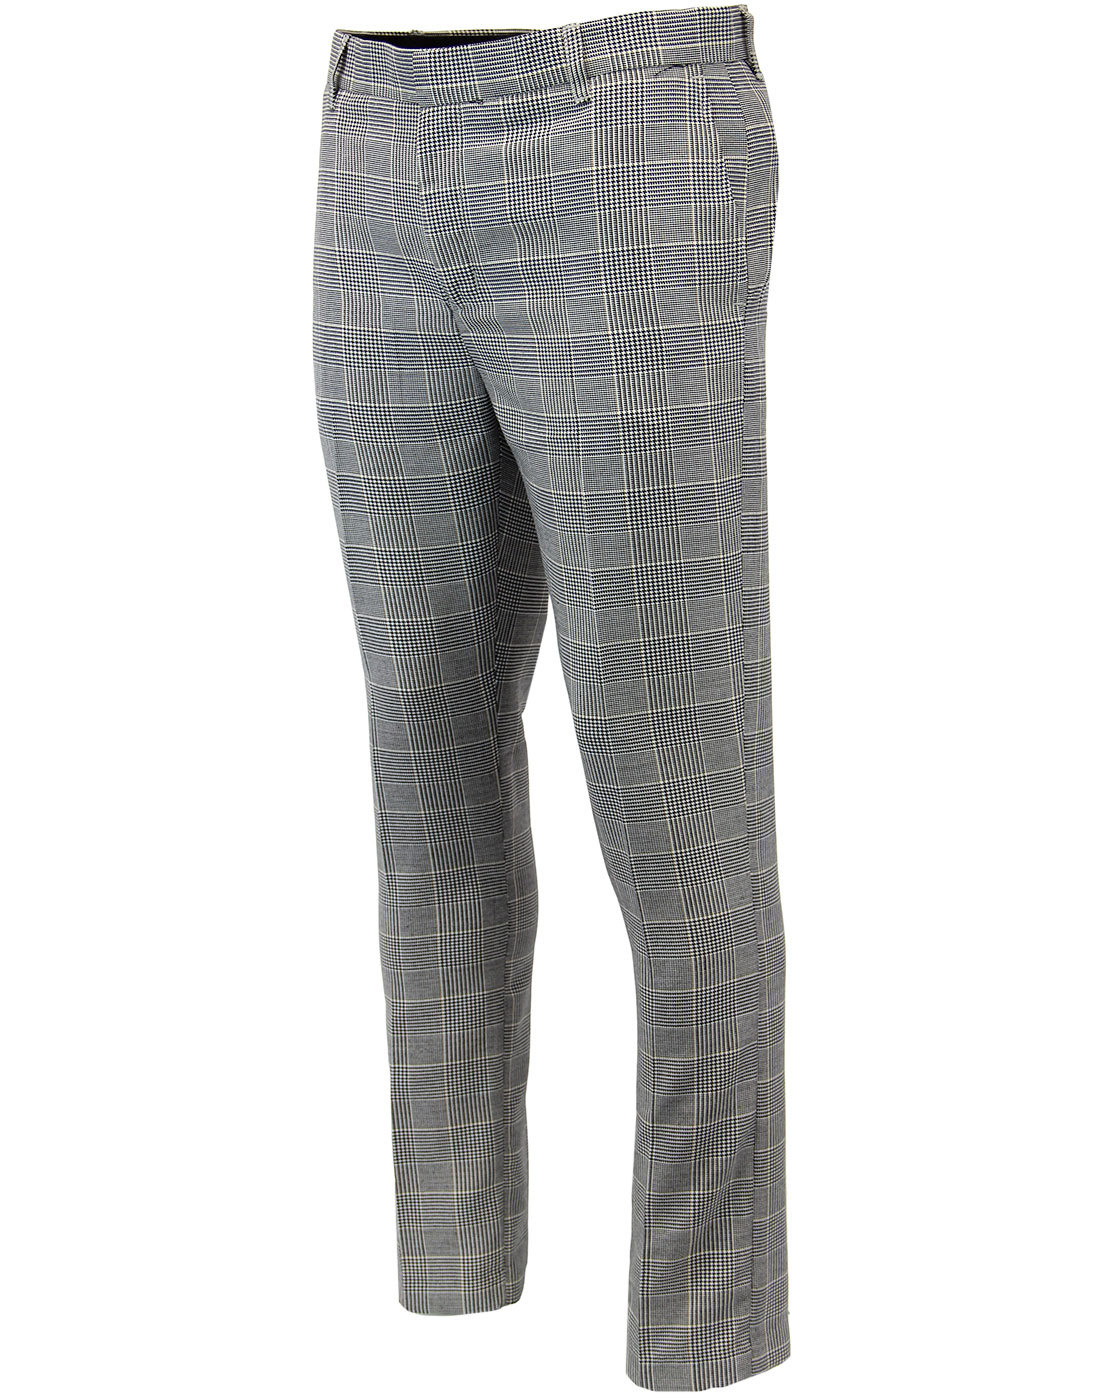 Jagger Retro 1960s Prince Of Wales Check Drainpipe Trousers in Grey